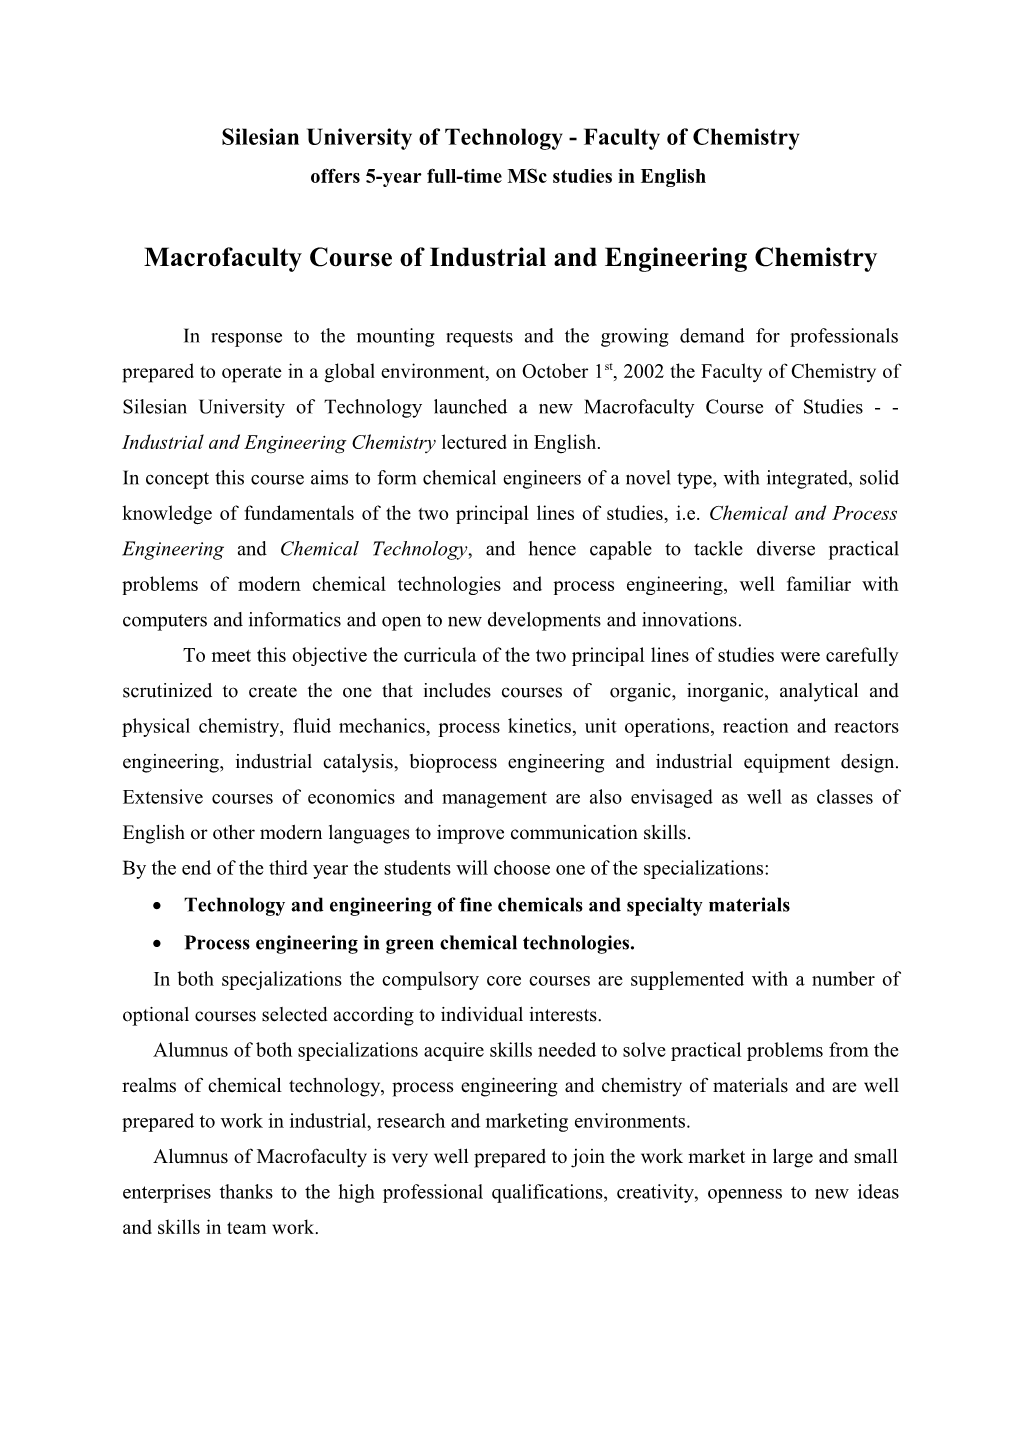 Industrial and Engineering Chemistry